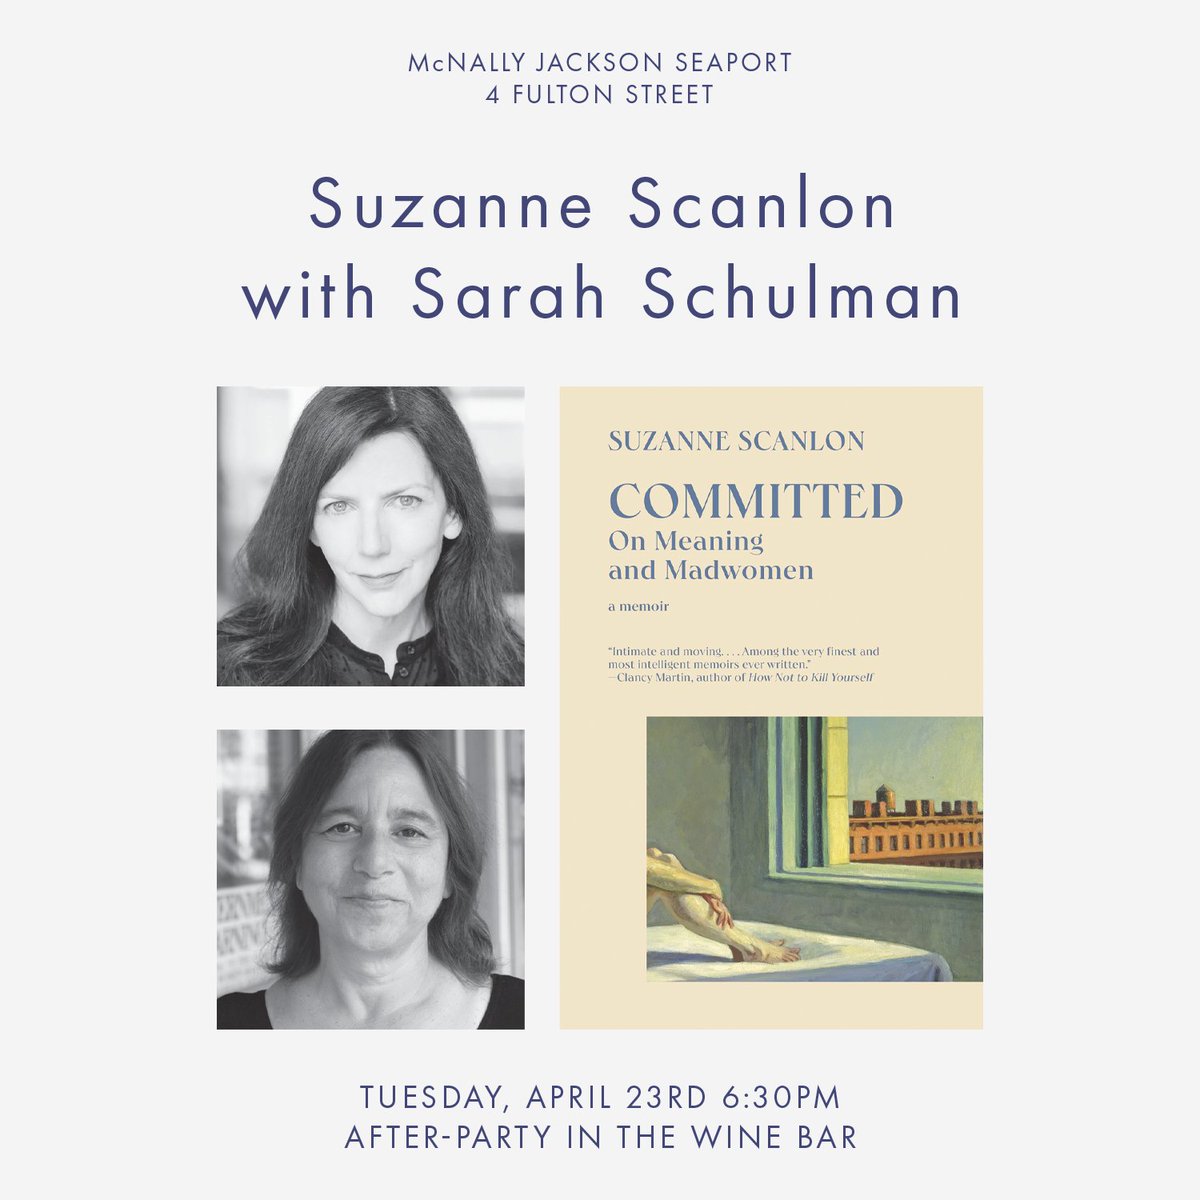 New York friends - this is tomorrow night! so honored to be in conversation with one of my all time favorite writers @sarahschulman3